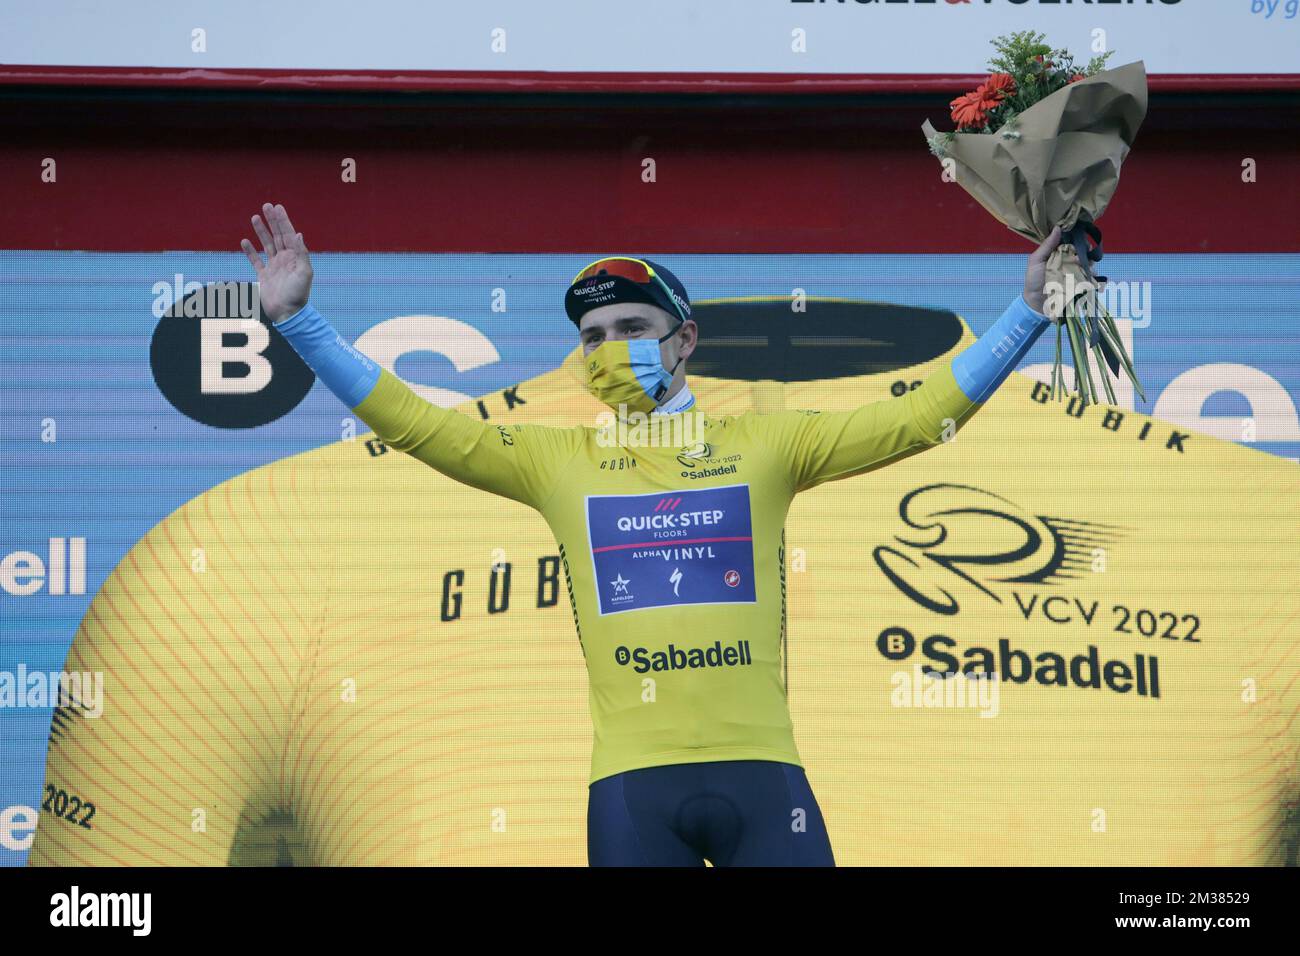 Belgian Remco Evenepoel of Quick-Step Alpha Vinyl wearing the yellow jersey celebrates on the podium after winning stage one of the 'Volta a la Comunitat Valenciana' Tour of Valencia cycling race in Spain, on Wednesday 02 February 2022 from Les Alqueries to Torralba del Pinar. The Tour is taking place from February 2nd to the 6th. BELGA PHOTO JUAN CARLOS CARDENAS  Stock Photo